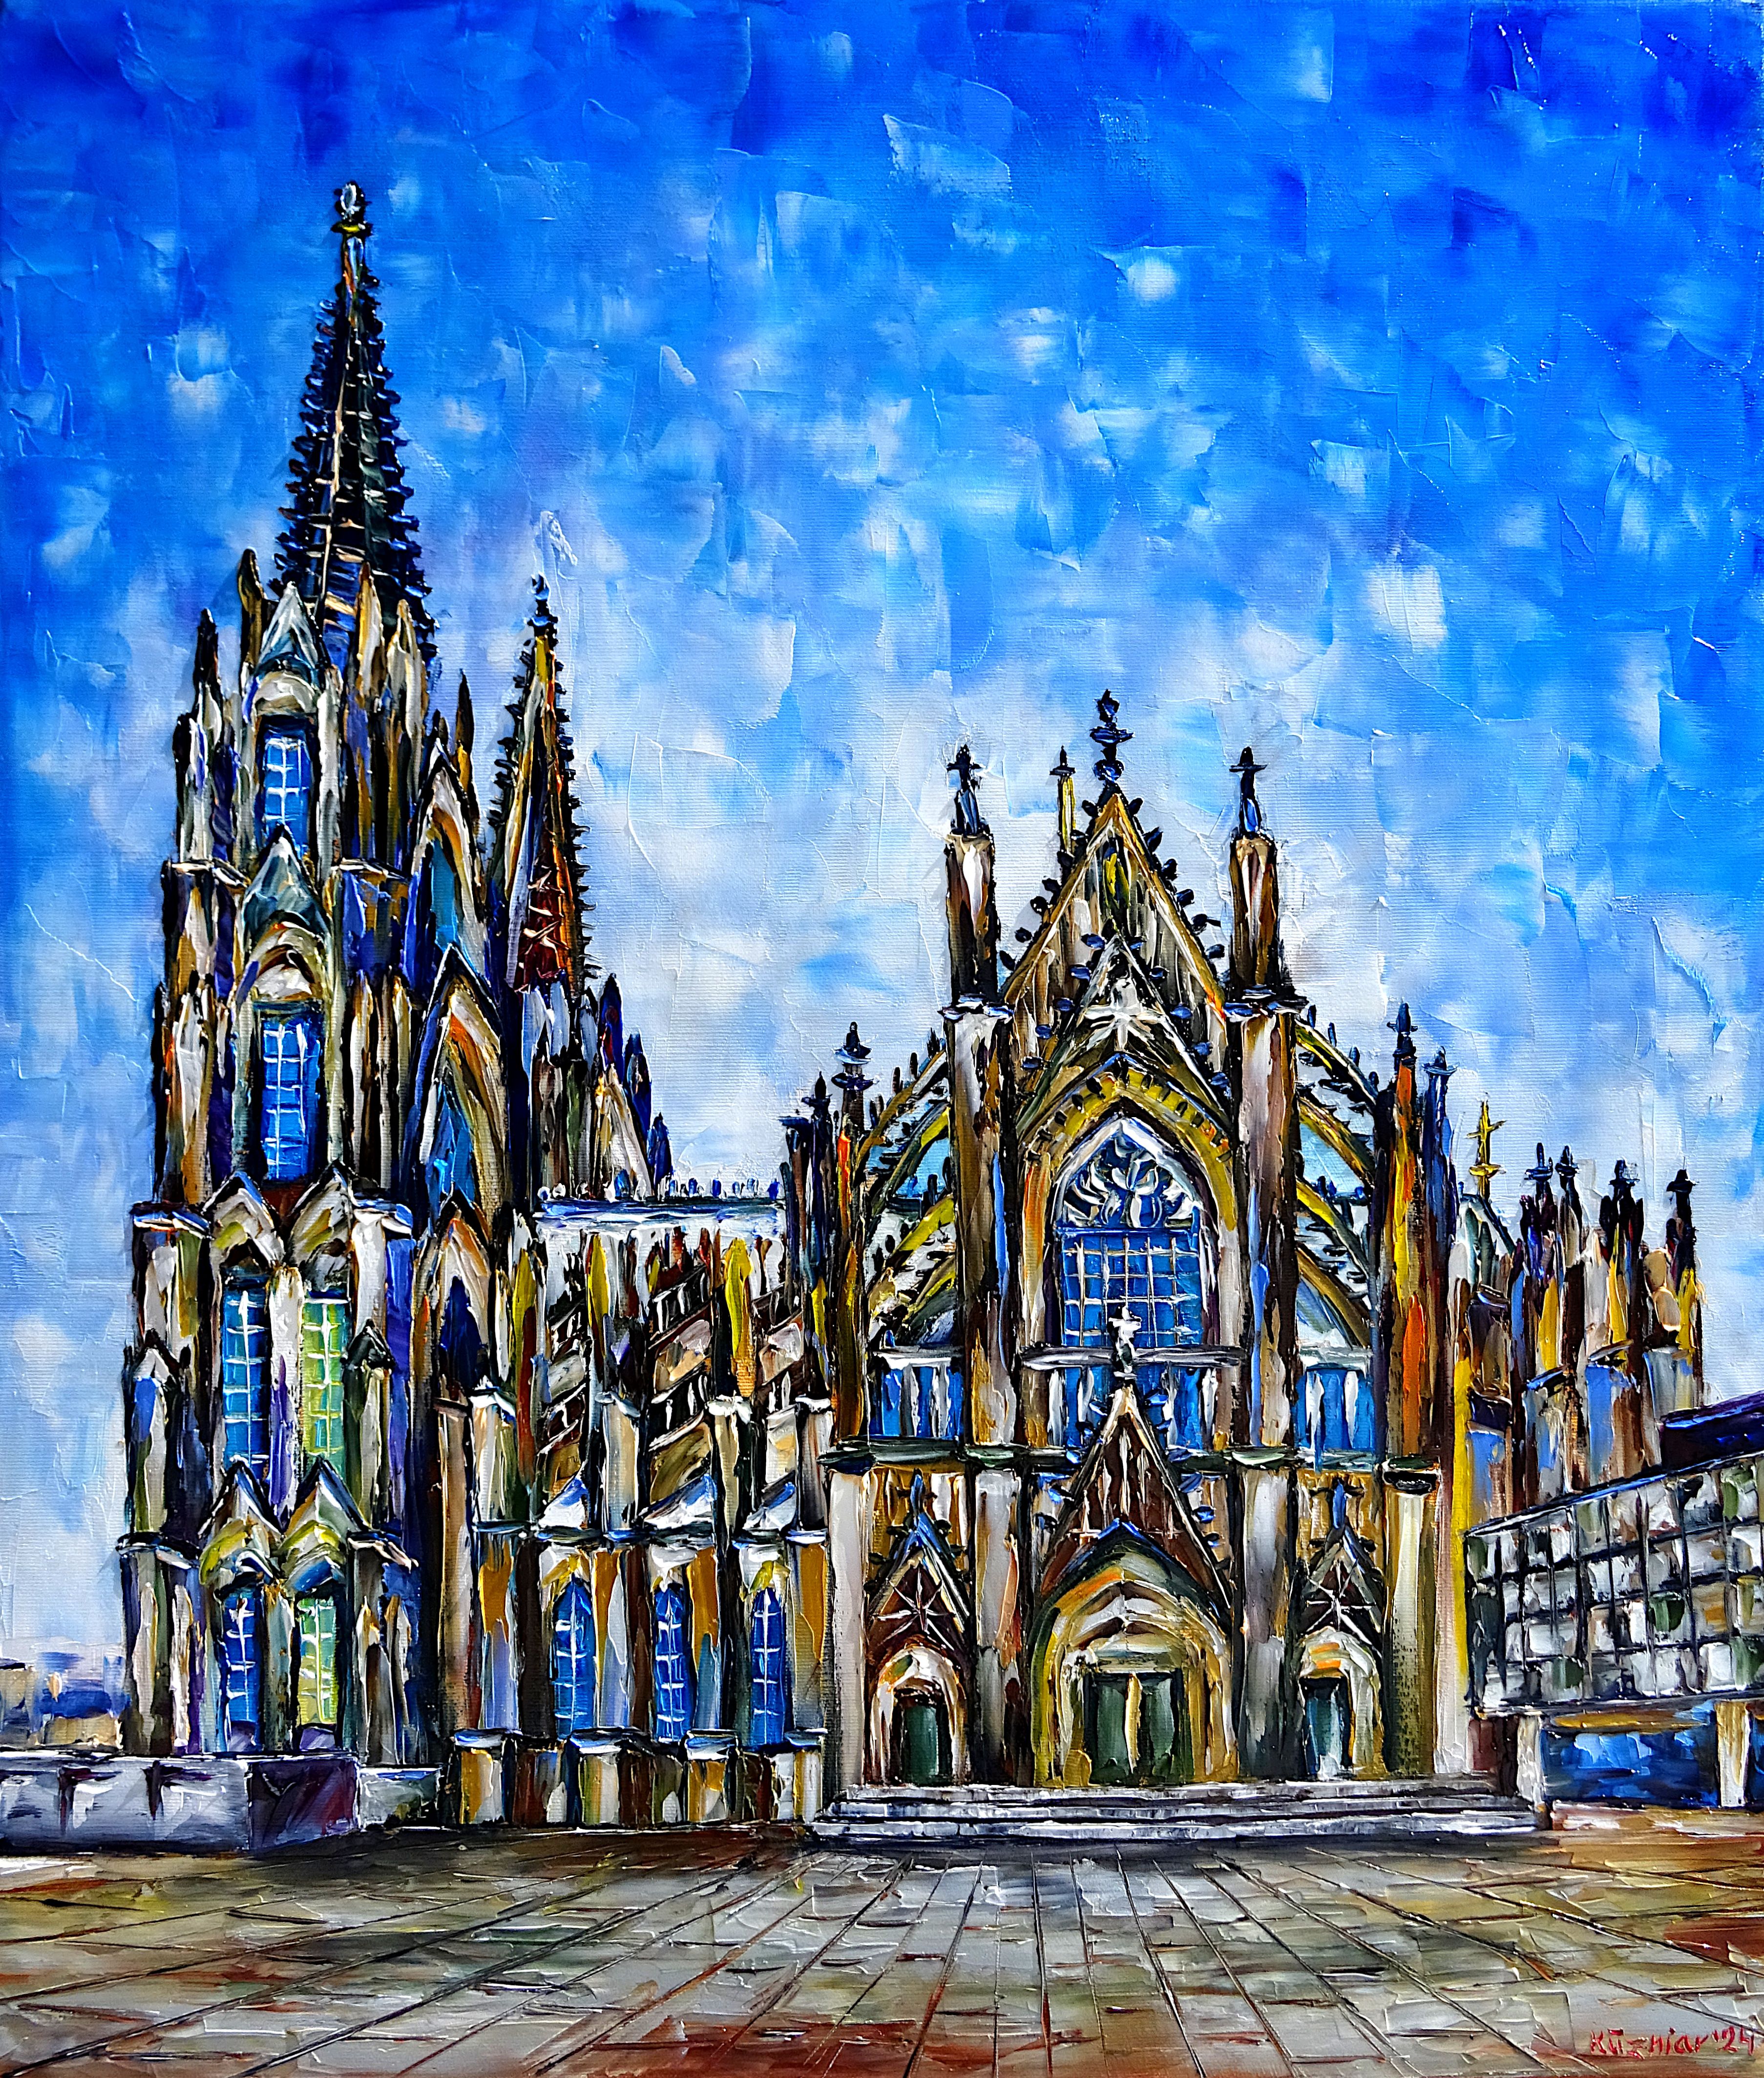 Cologne cathedral, Cologne cathedral painting,Cologne cathedral in oil,church in Cologne,Cologne landmark,church painting,cathedral,national symbol,Cologne cathedral art,Cologne cathedral abstract,Cologne cathedral colorful,Cologne love,I love Cologne,Germany,Germany's sights,beautiful Germany,tourism,palette knife oil painting,expressive art,expressive painting,expressionism,lively colors,colorful painting,impasto painting,figurative